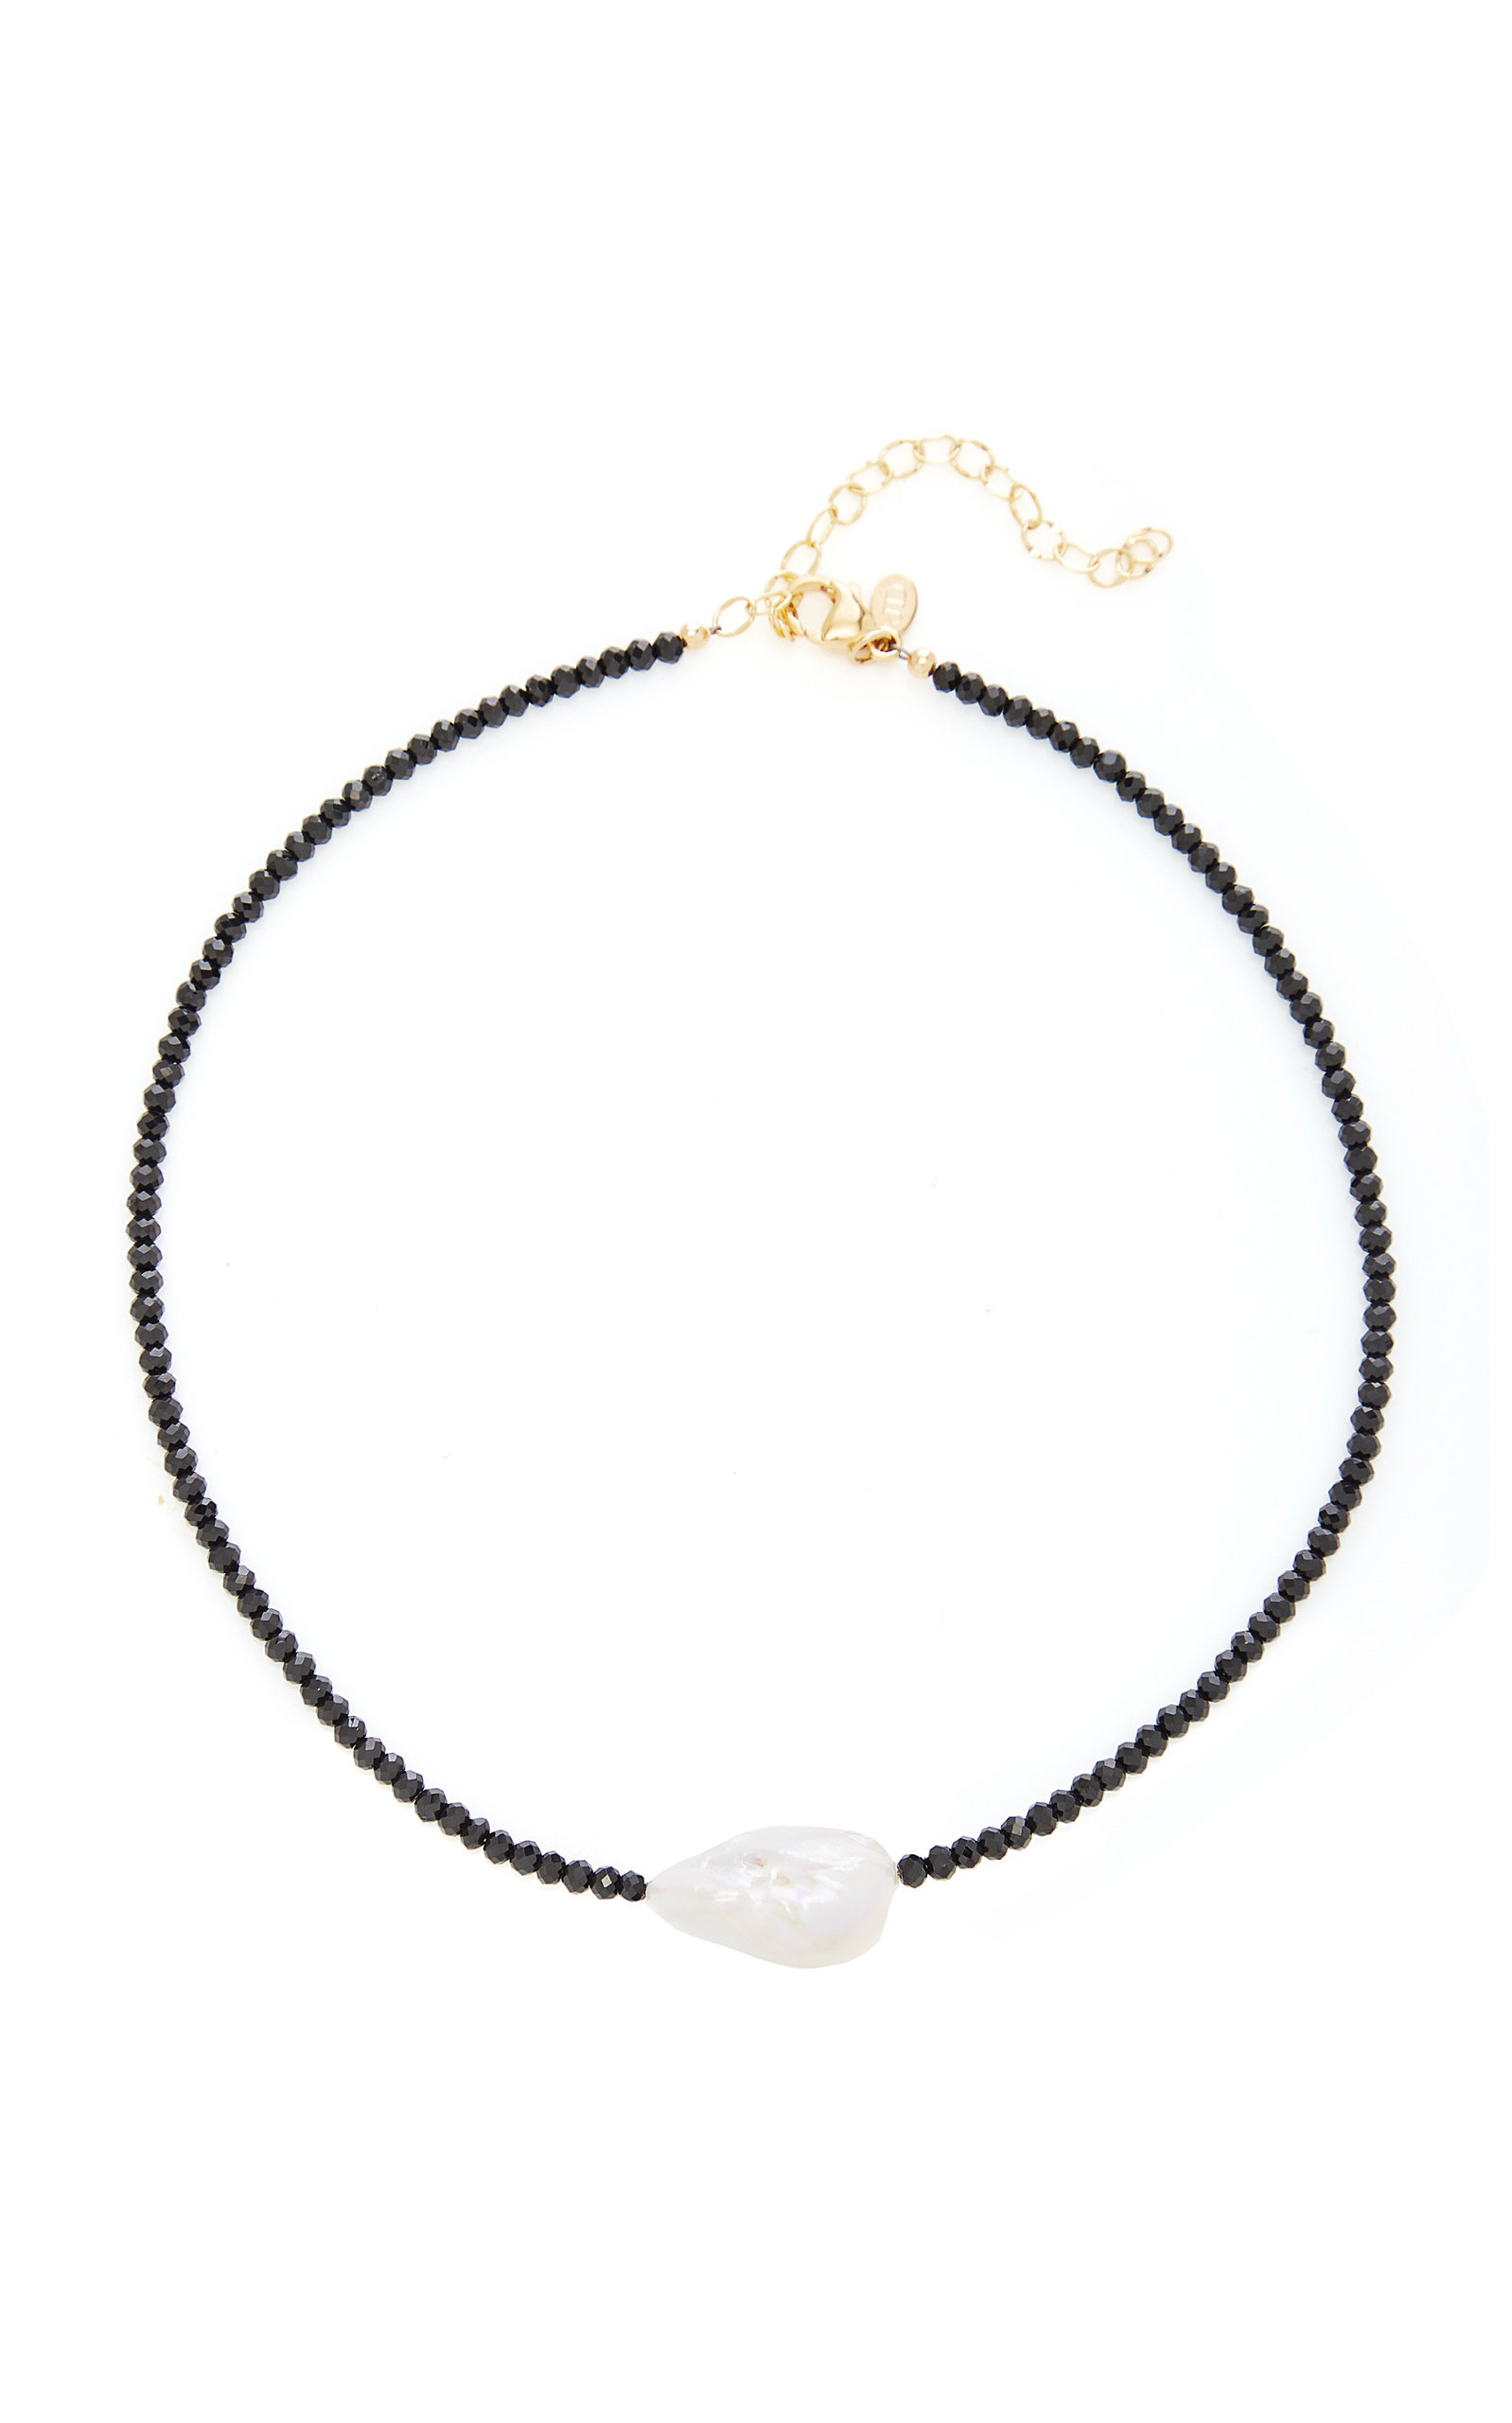 Joie DiGiovanni Women's Gold-Filled; Spinel and Pearl Necklace